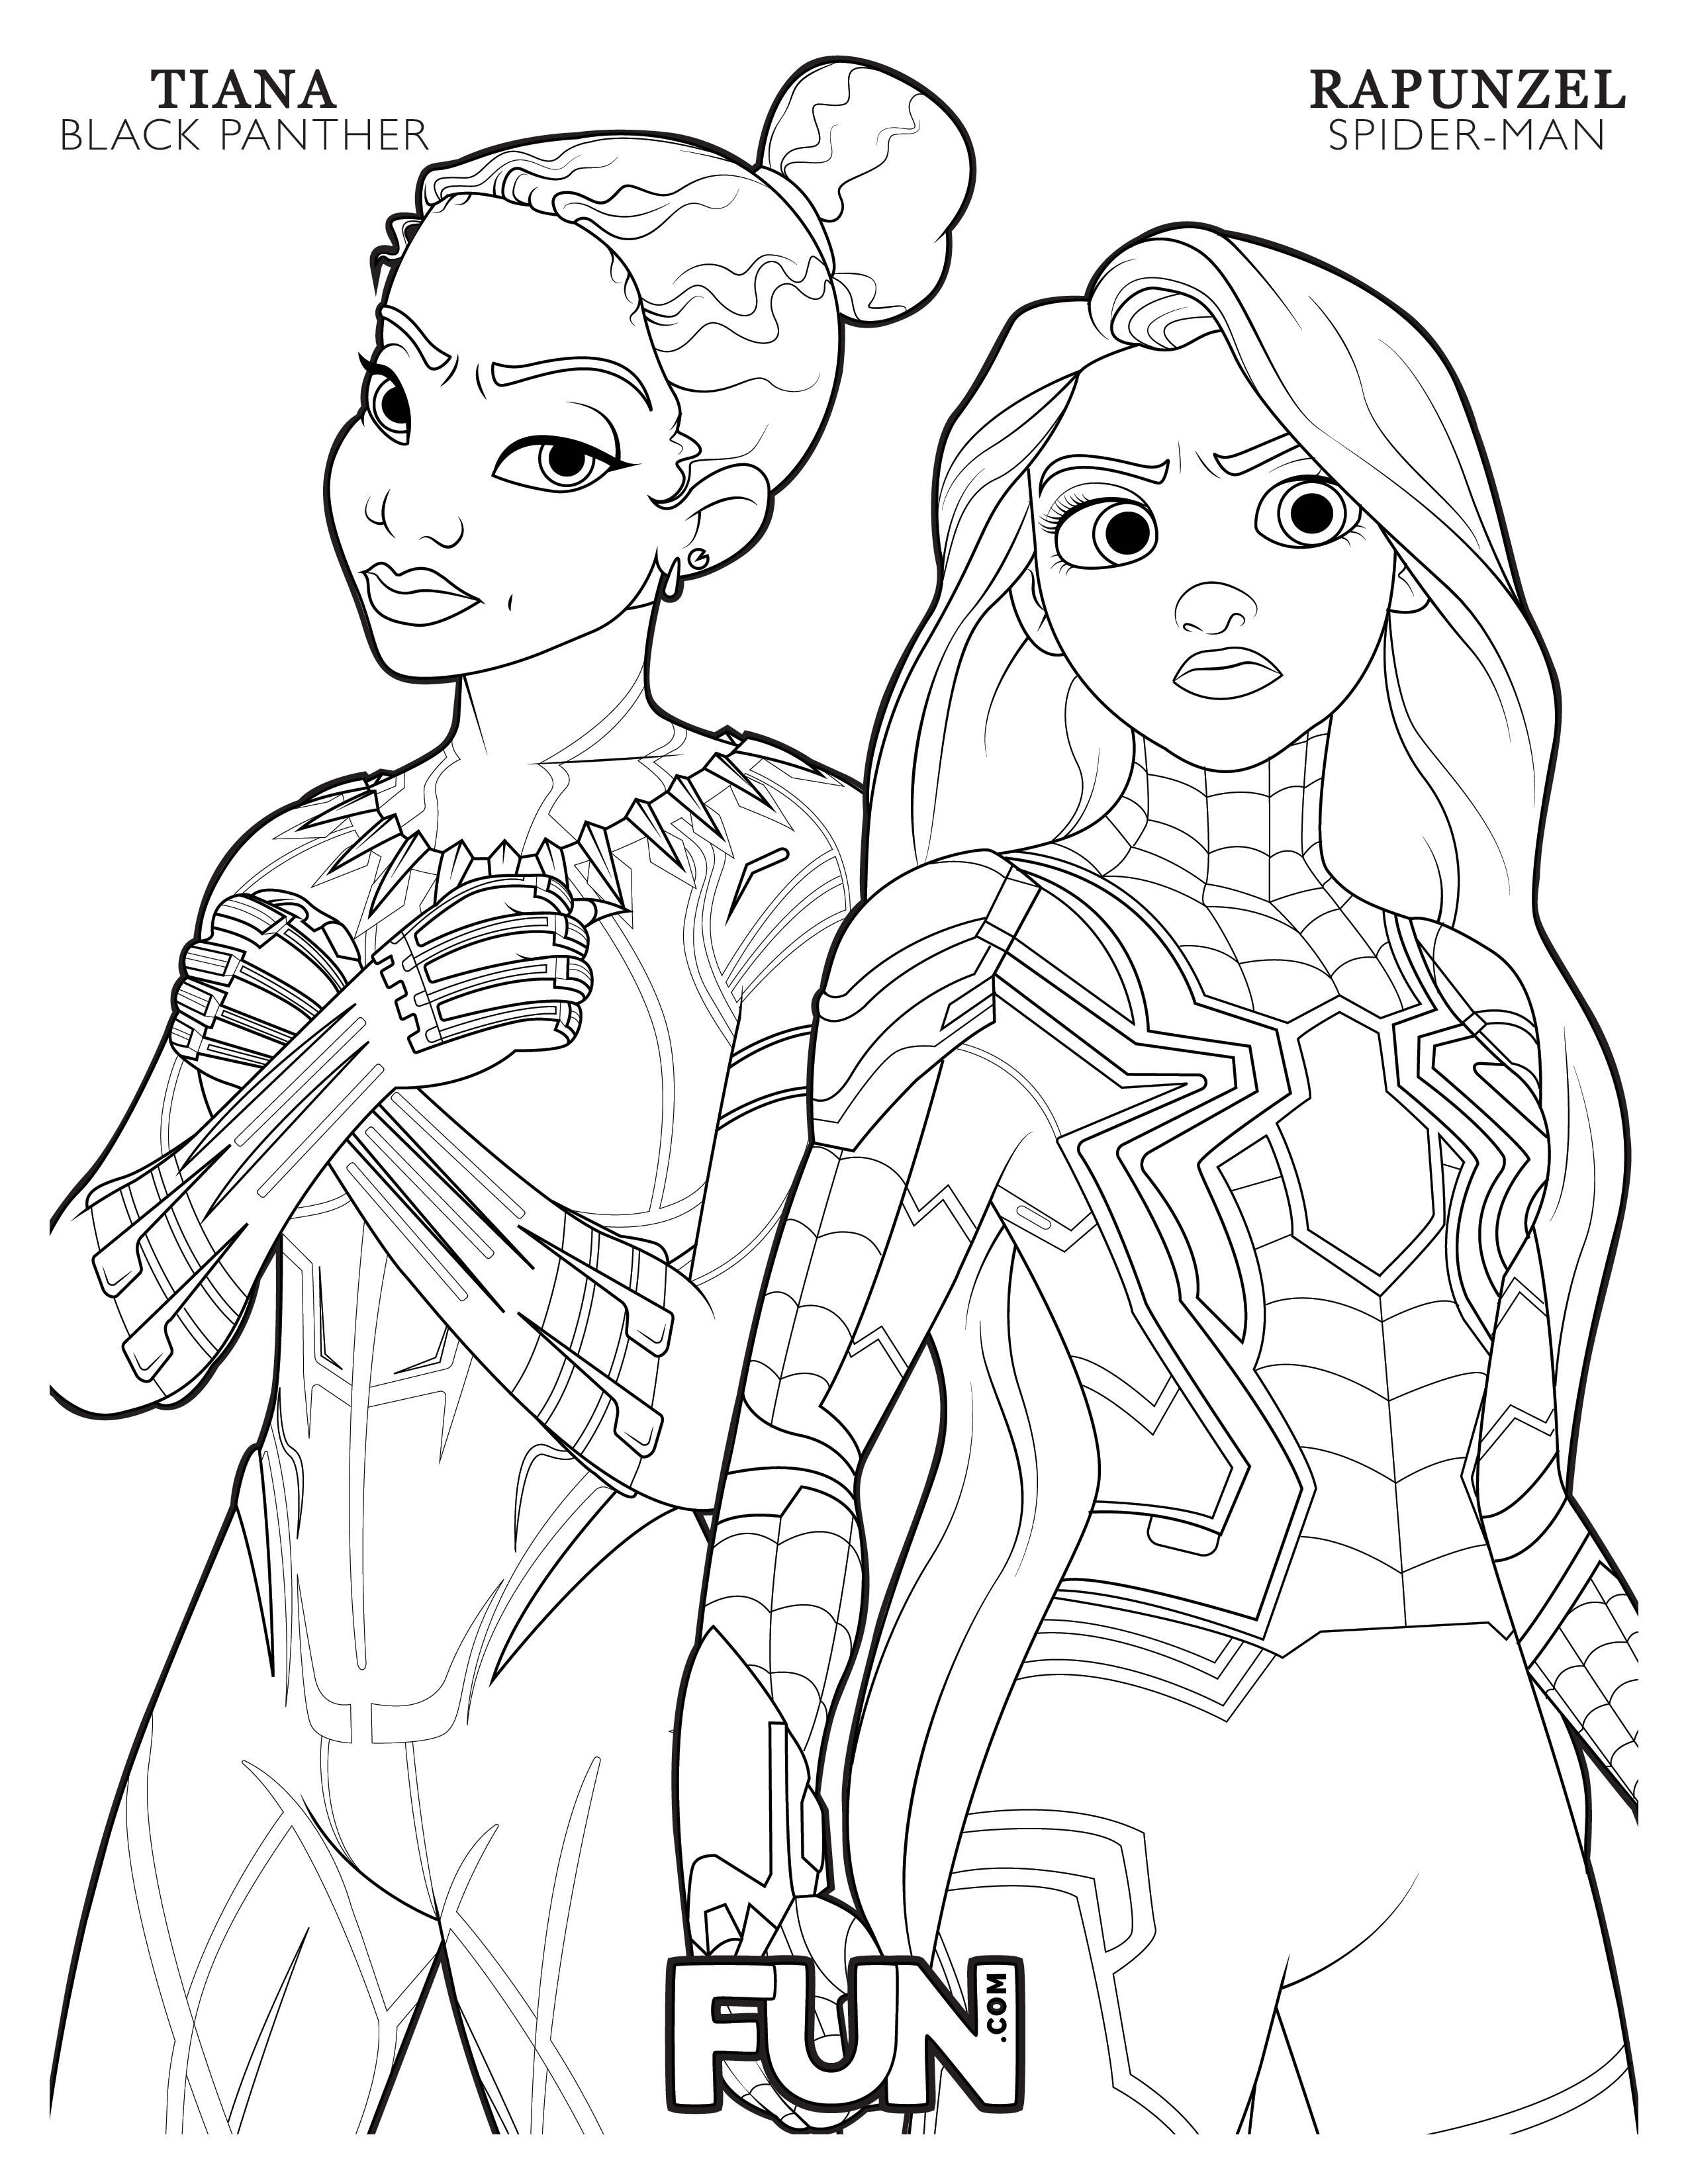 Tiana Black Panther and Rapunzel Spider-Man Coloring Page